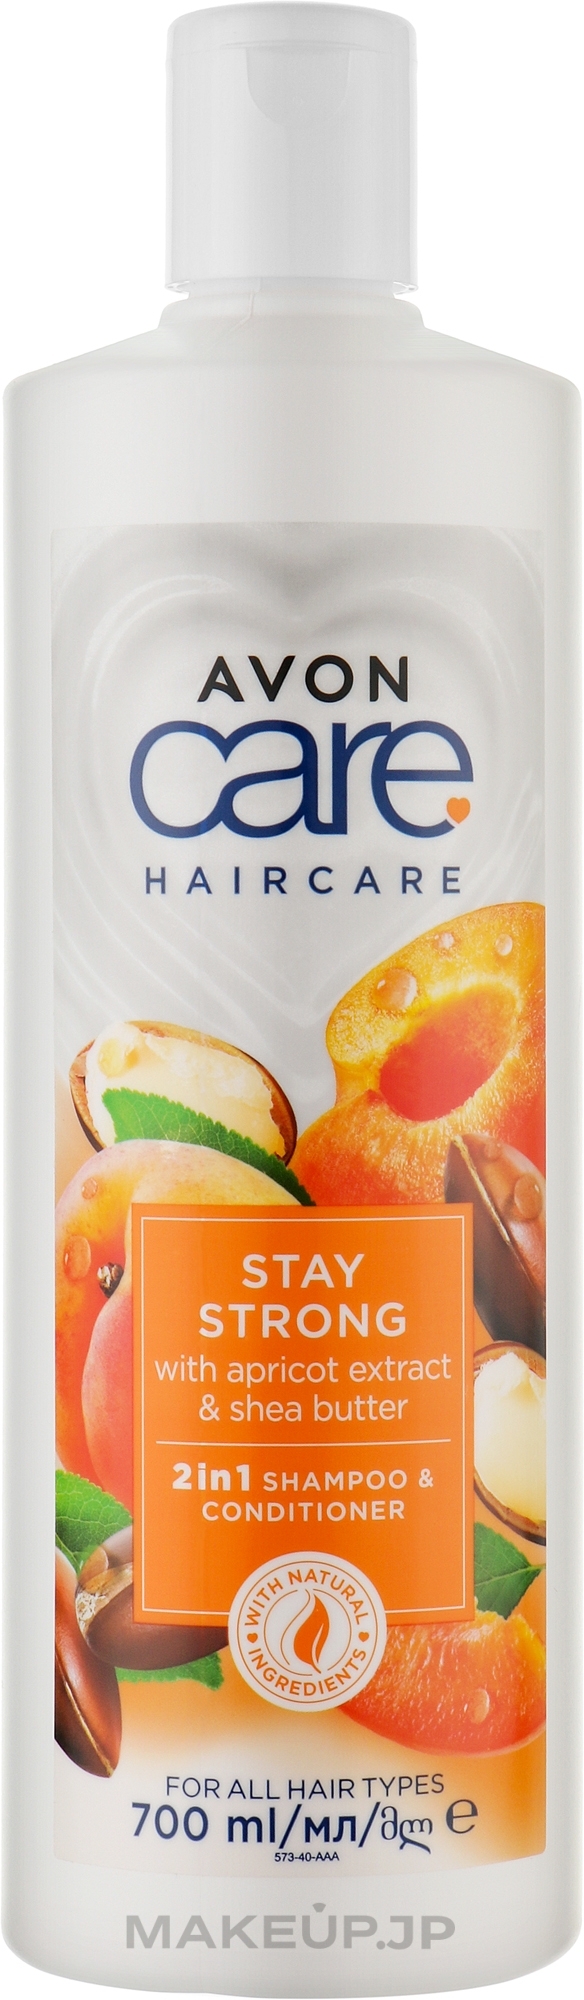 2-in-1 Conditioner & Shampoo - Avon Care Stay Strong Apricot & Shea Butter Shampoo And Conditioner — photo 700 ml